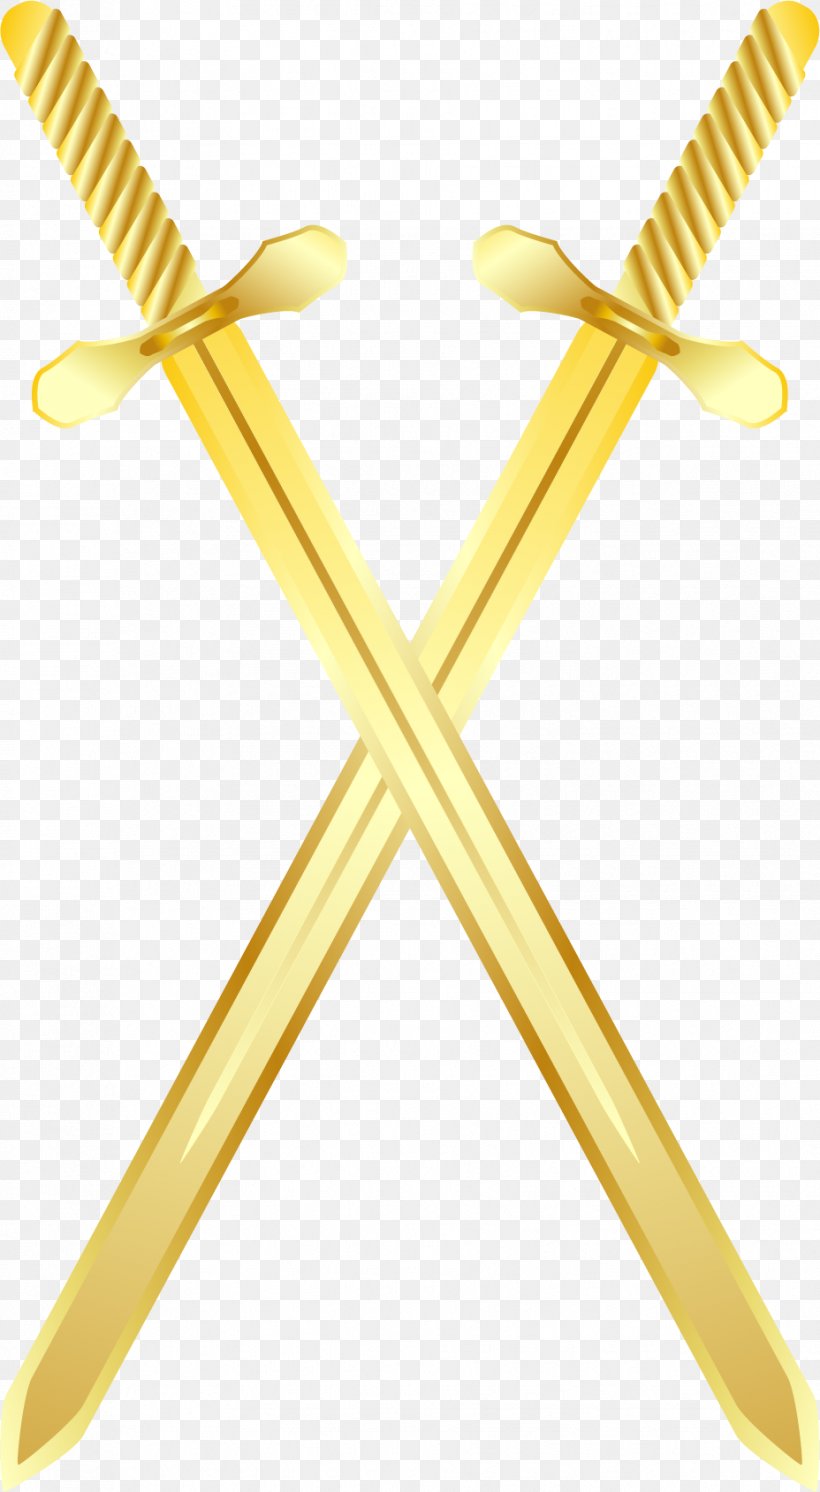 Sword Euclidean Vector Computer File, PNG, 928x1689px, Sword, Cold Weapon, Drawing, Gold, Resource Download Free